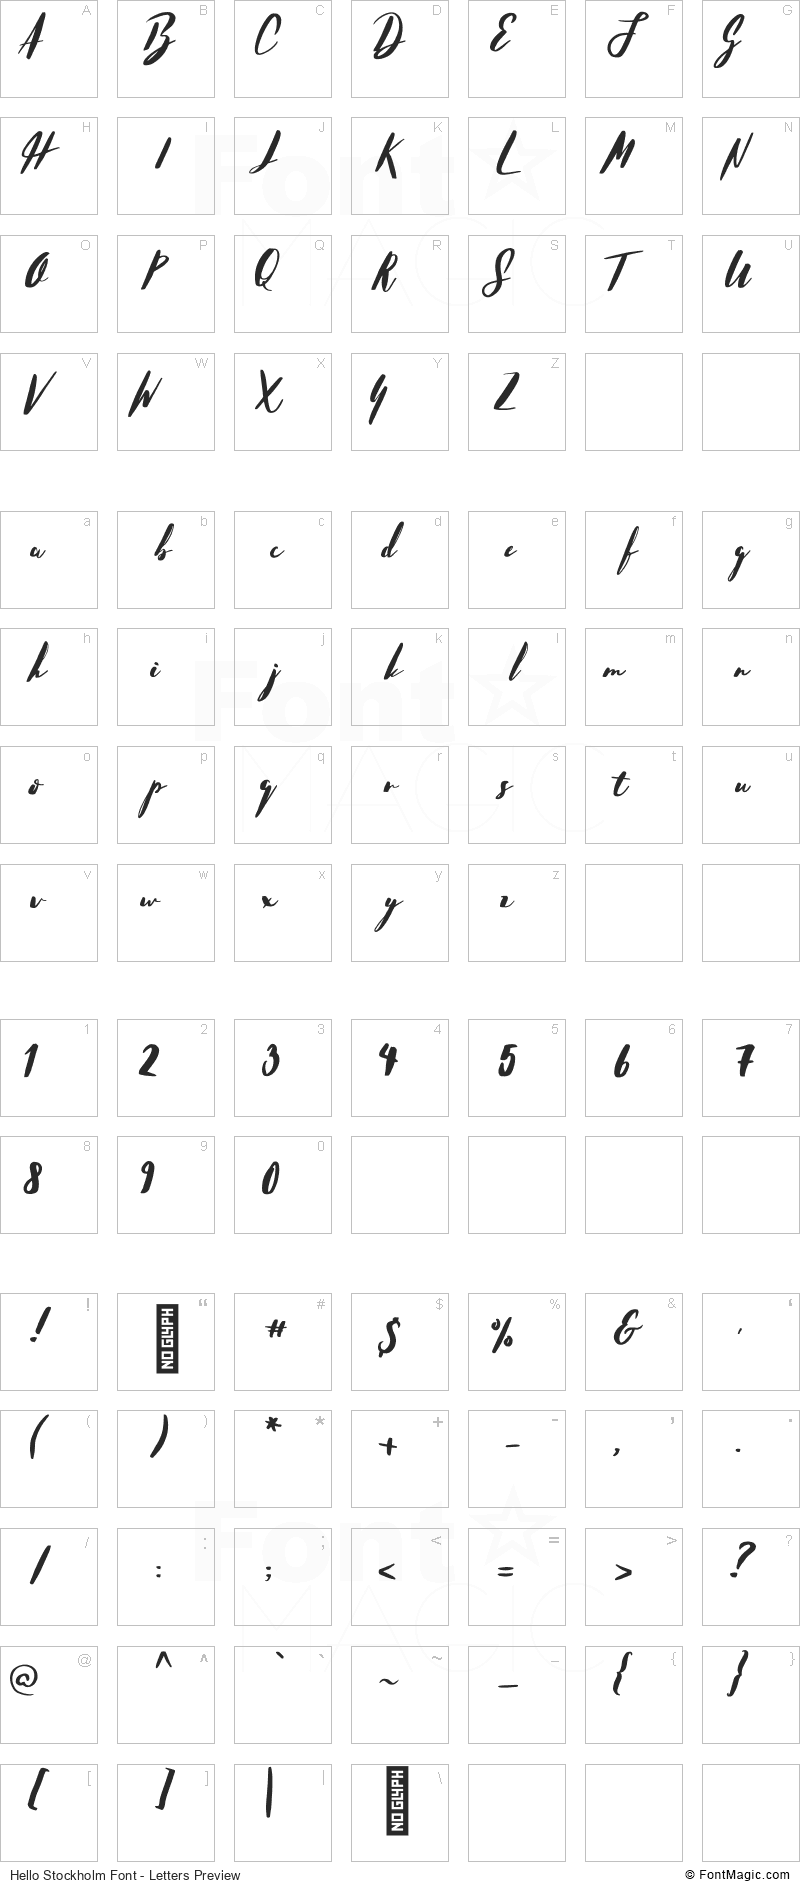 Hello Stockholm Font - All Latters Preview Chart